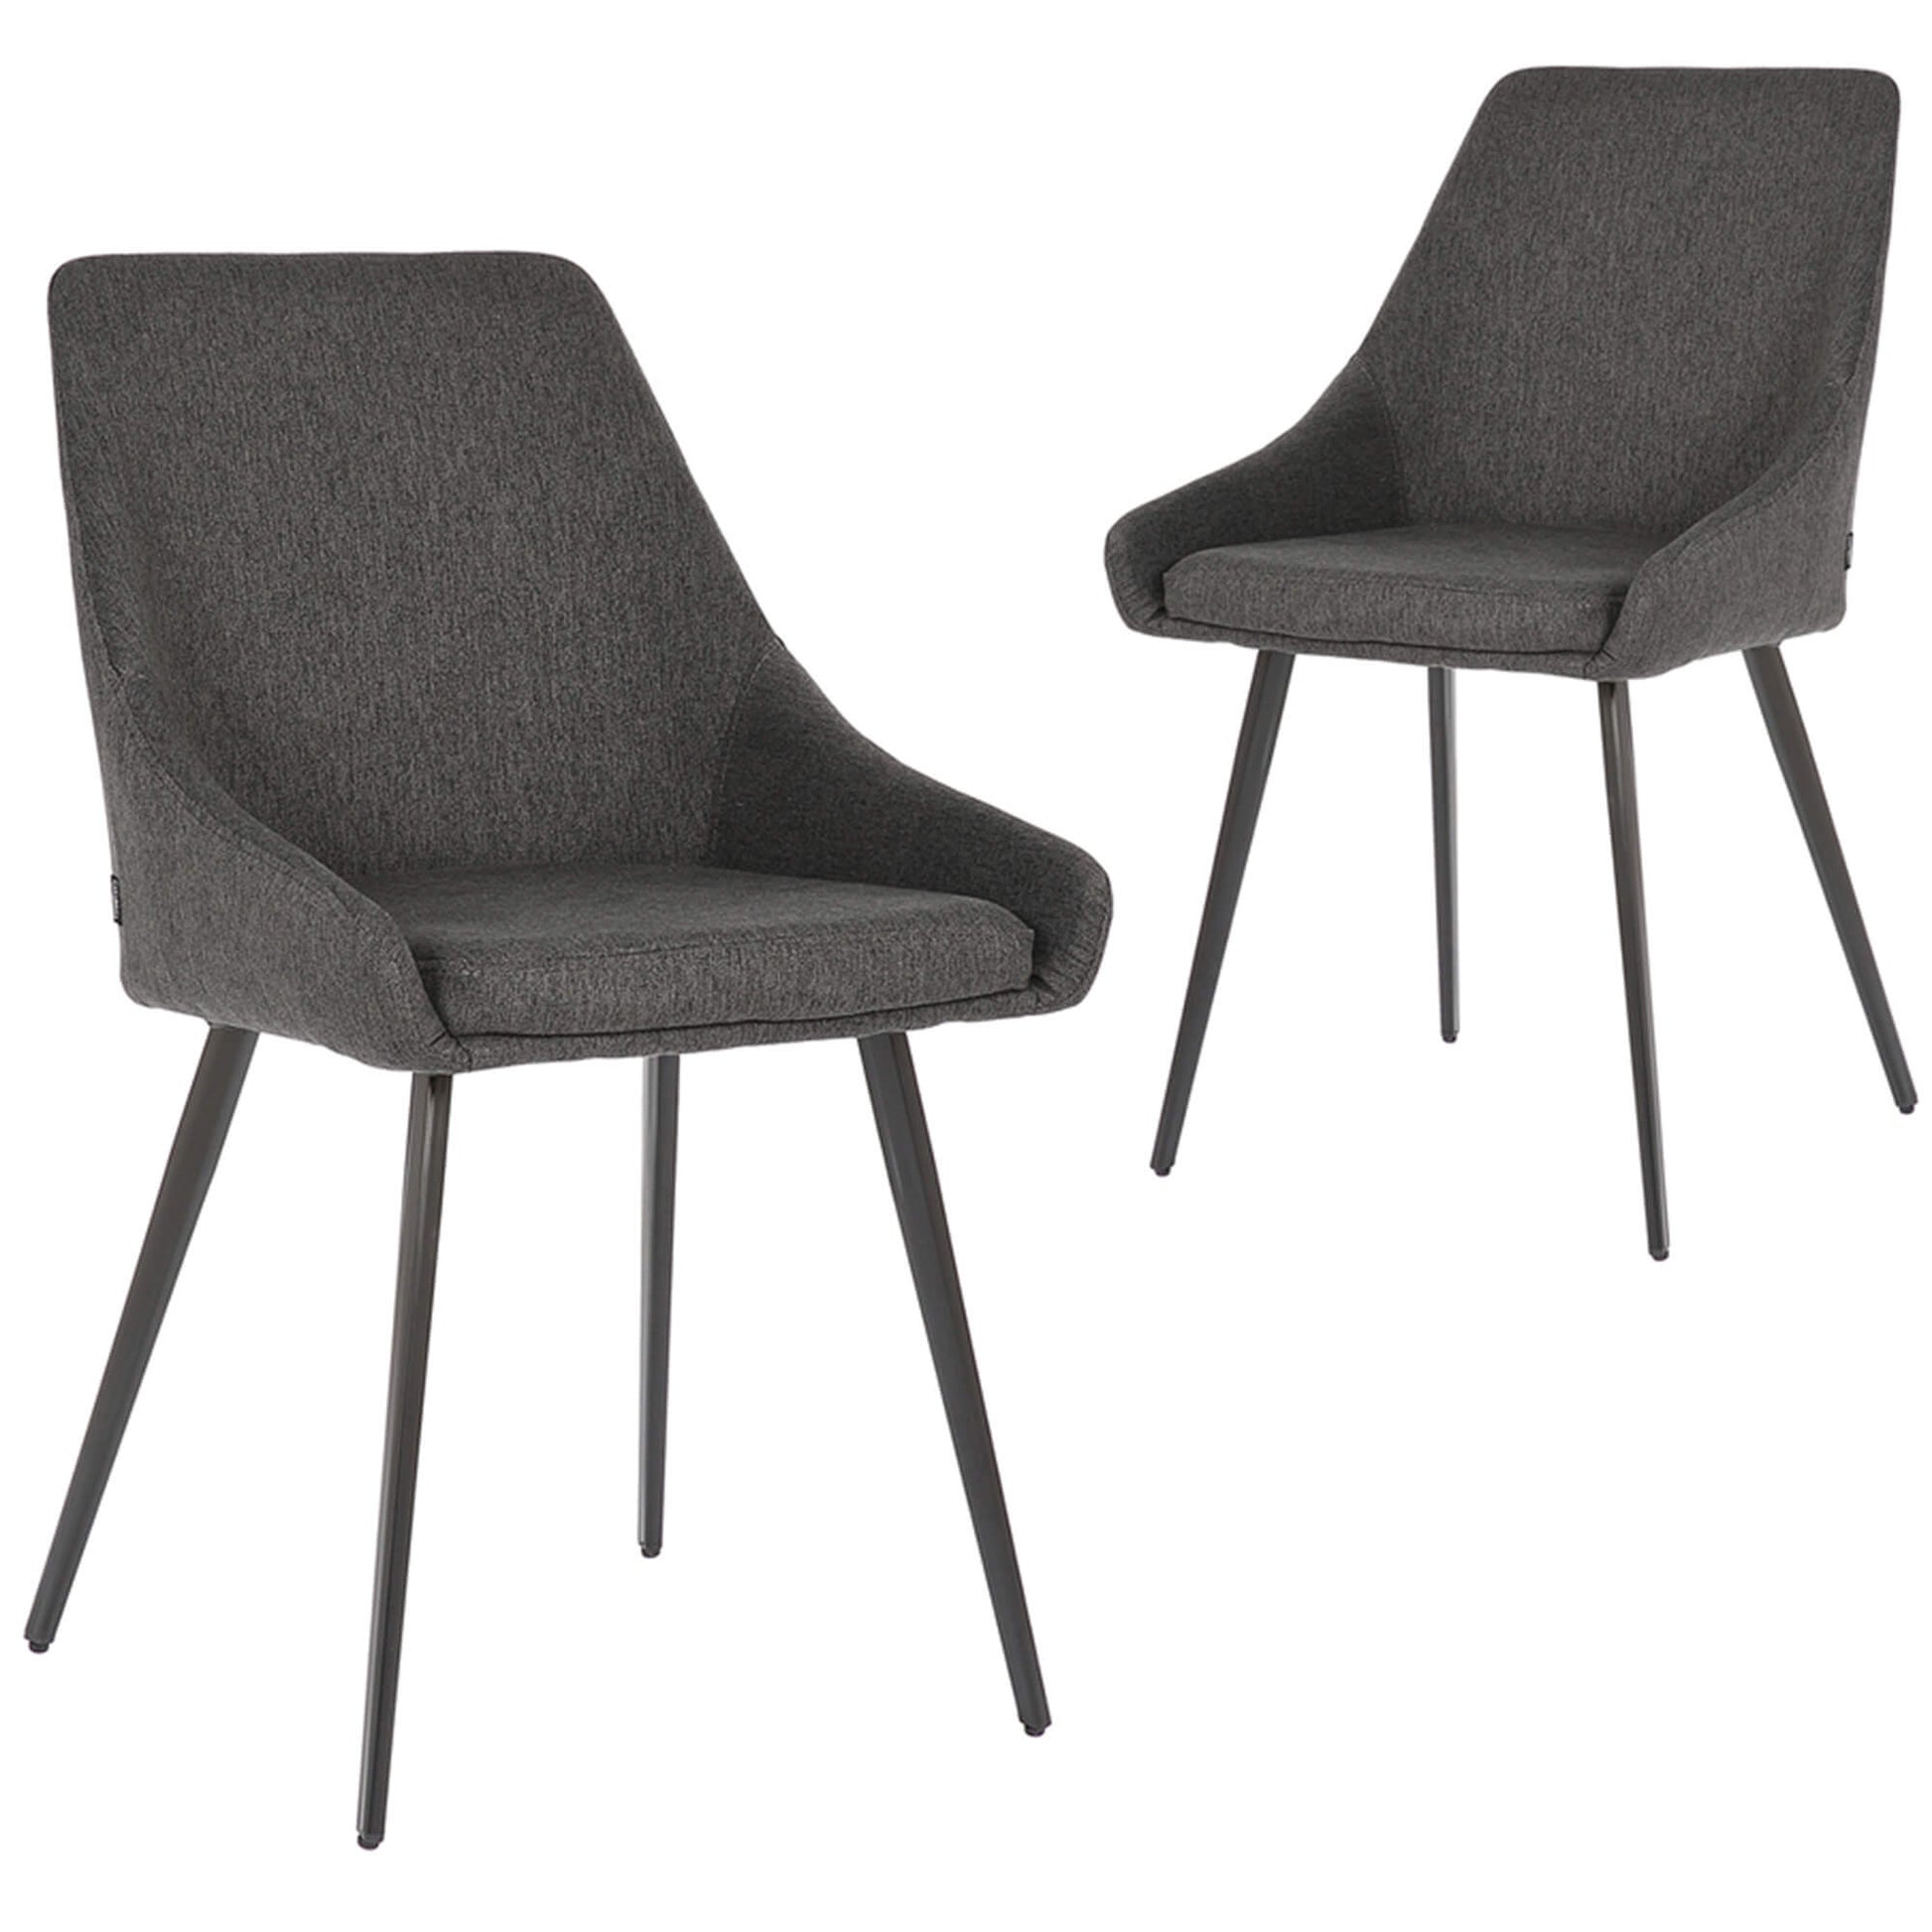 Chesterton | Stain Resistant Waterproof Fabric Dining Chairs | Set Of 2 | Dark Grey